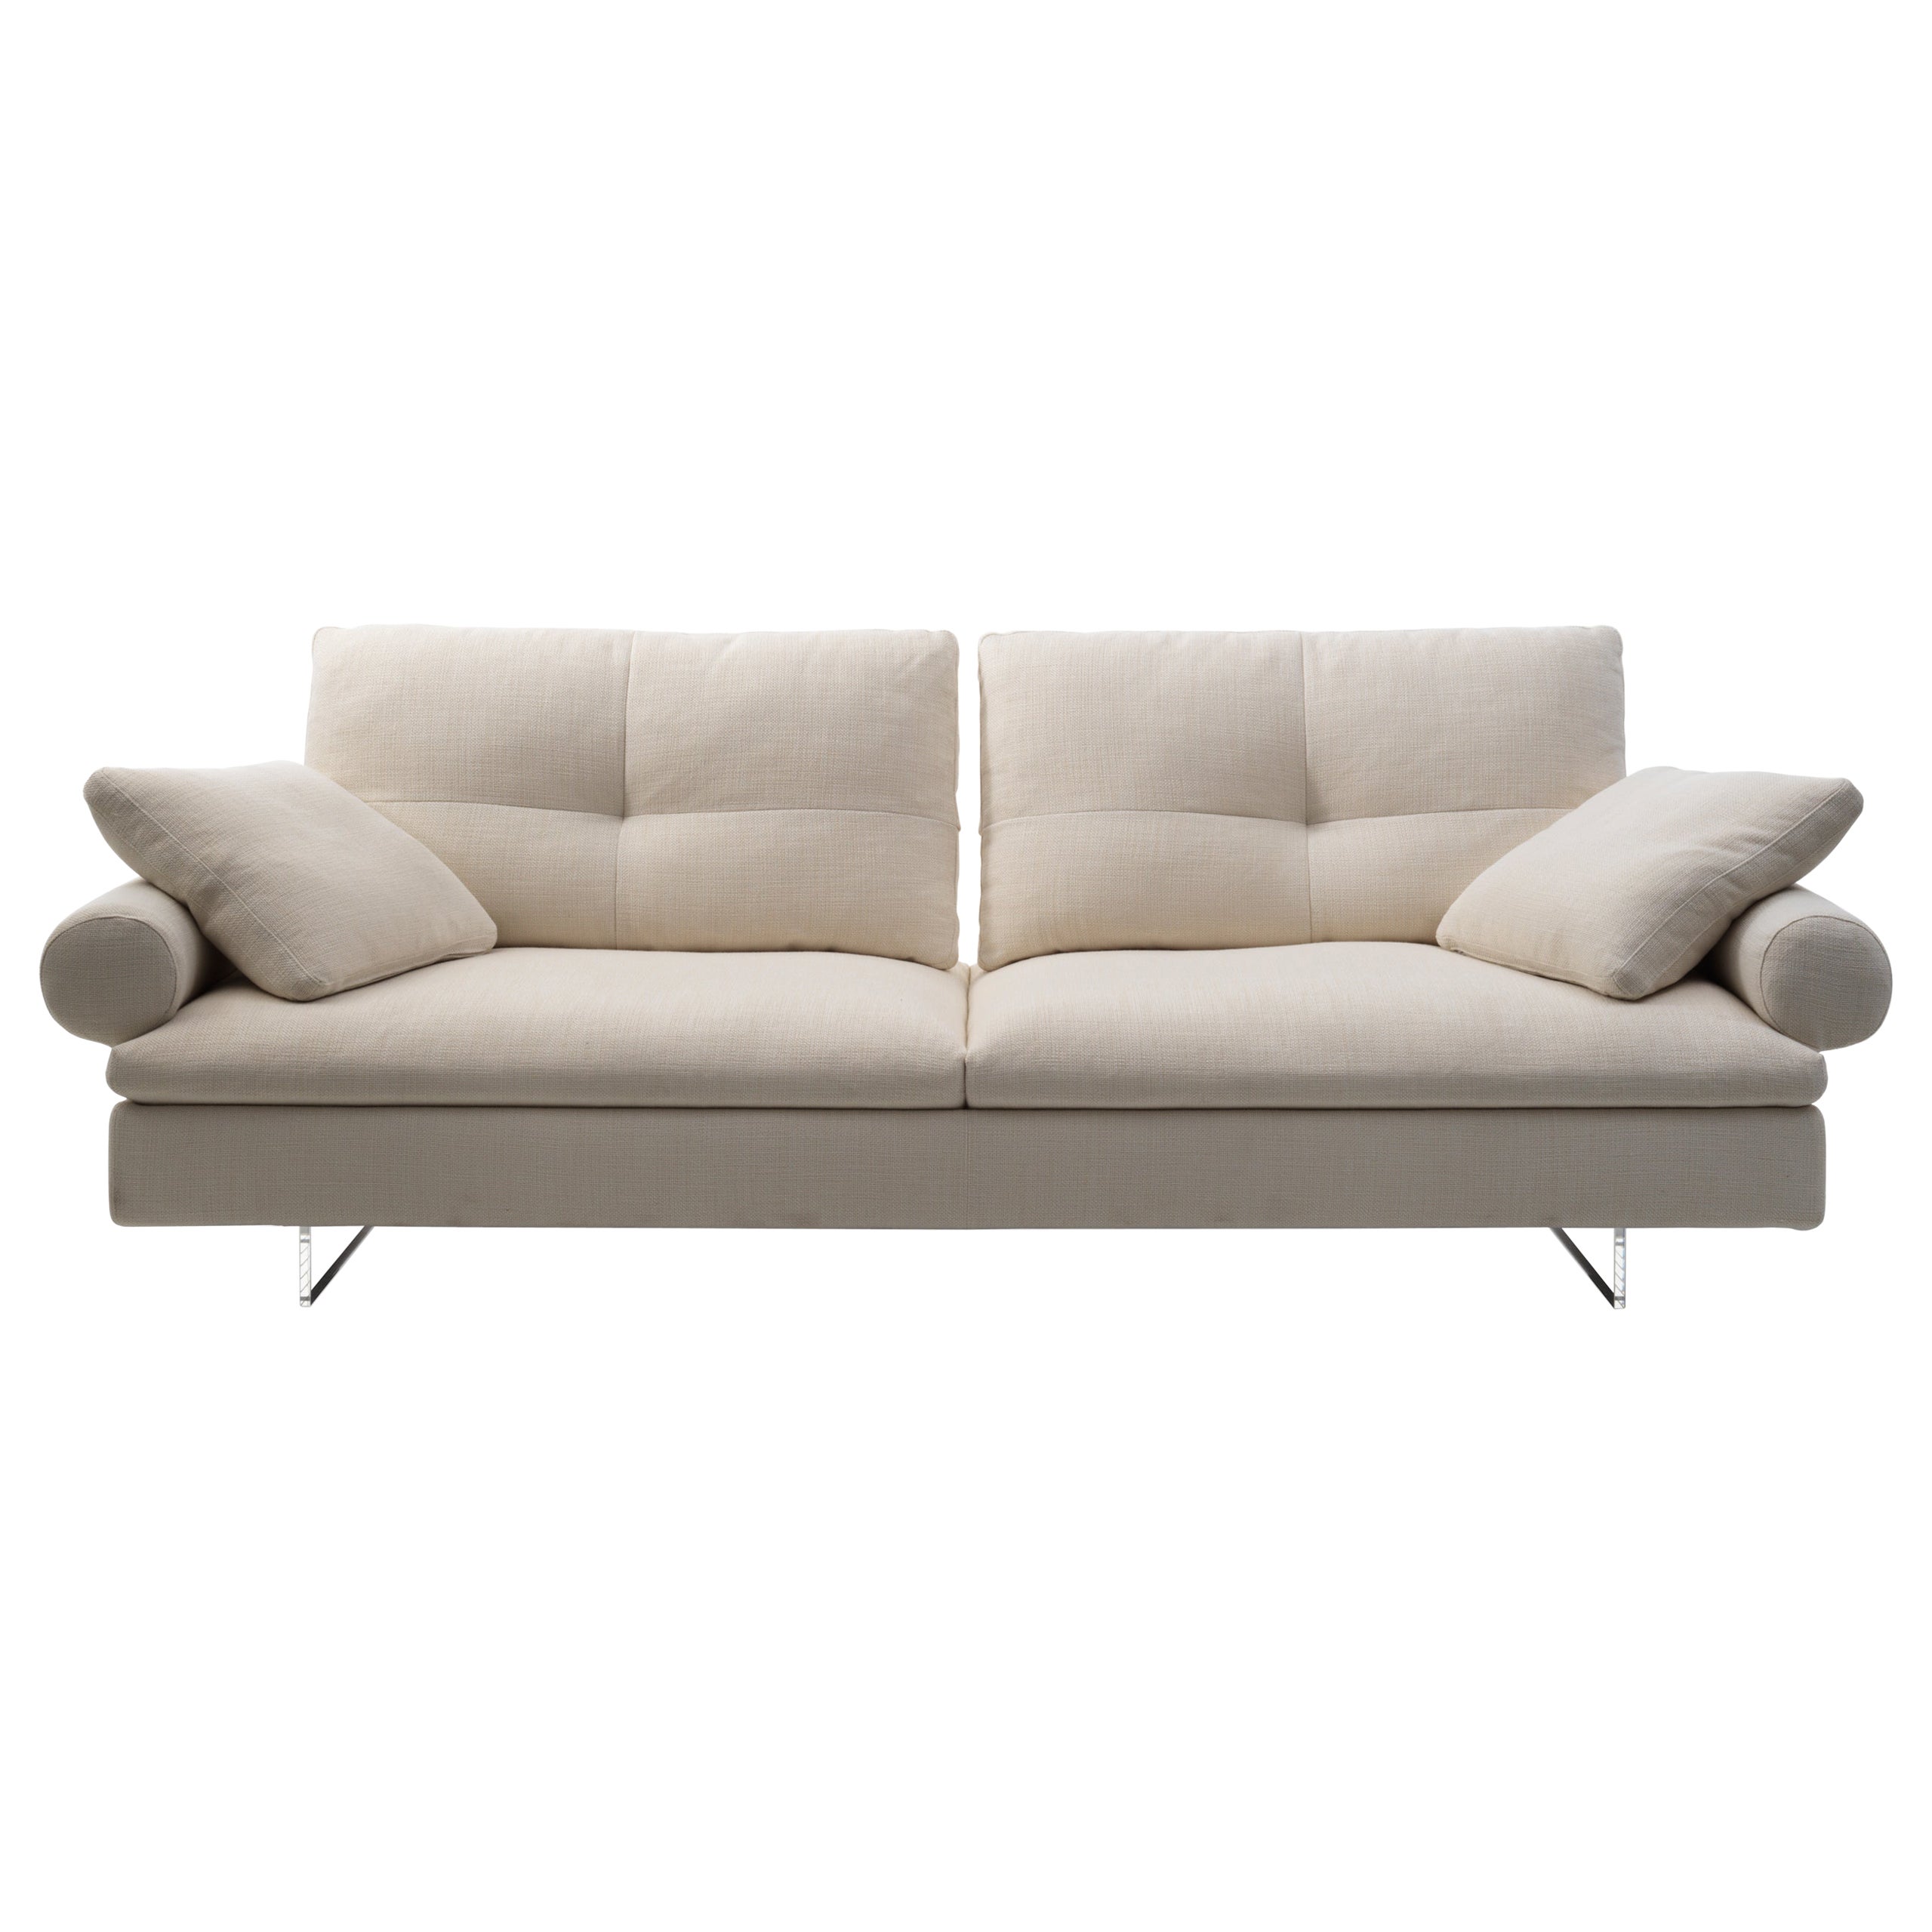 Limes New Sofa in Avant Après Upholstery and Armrest with Roll by Sergio Bicego